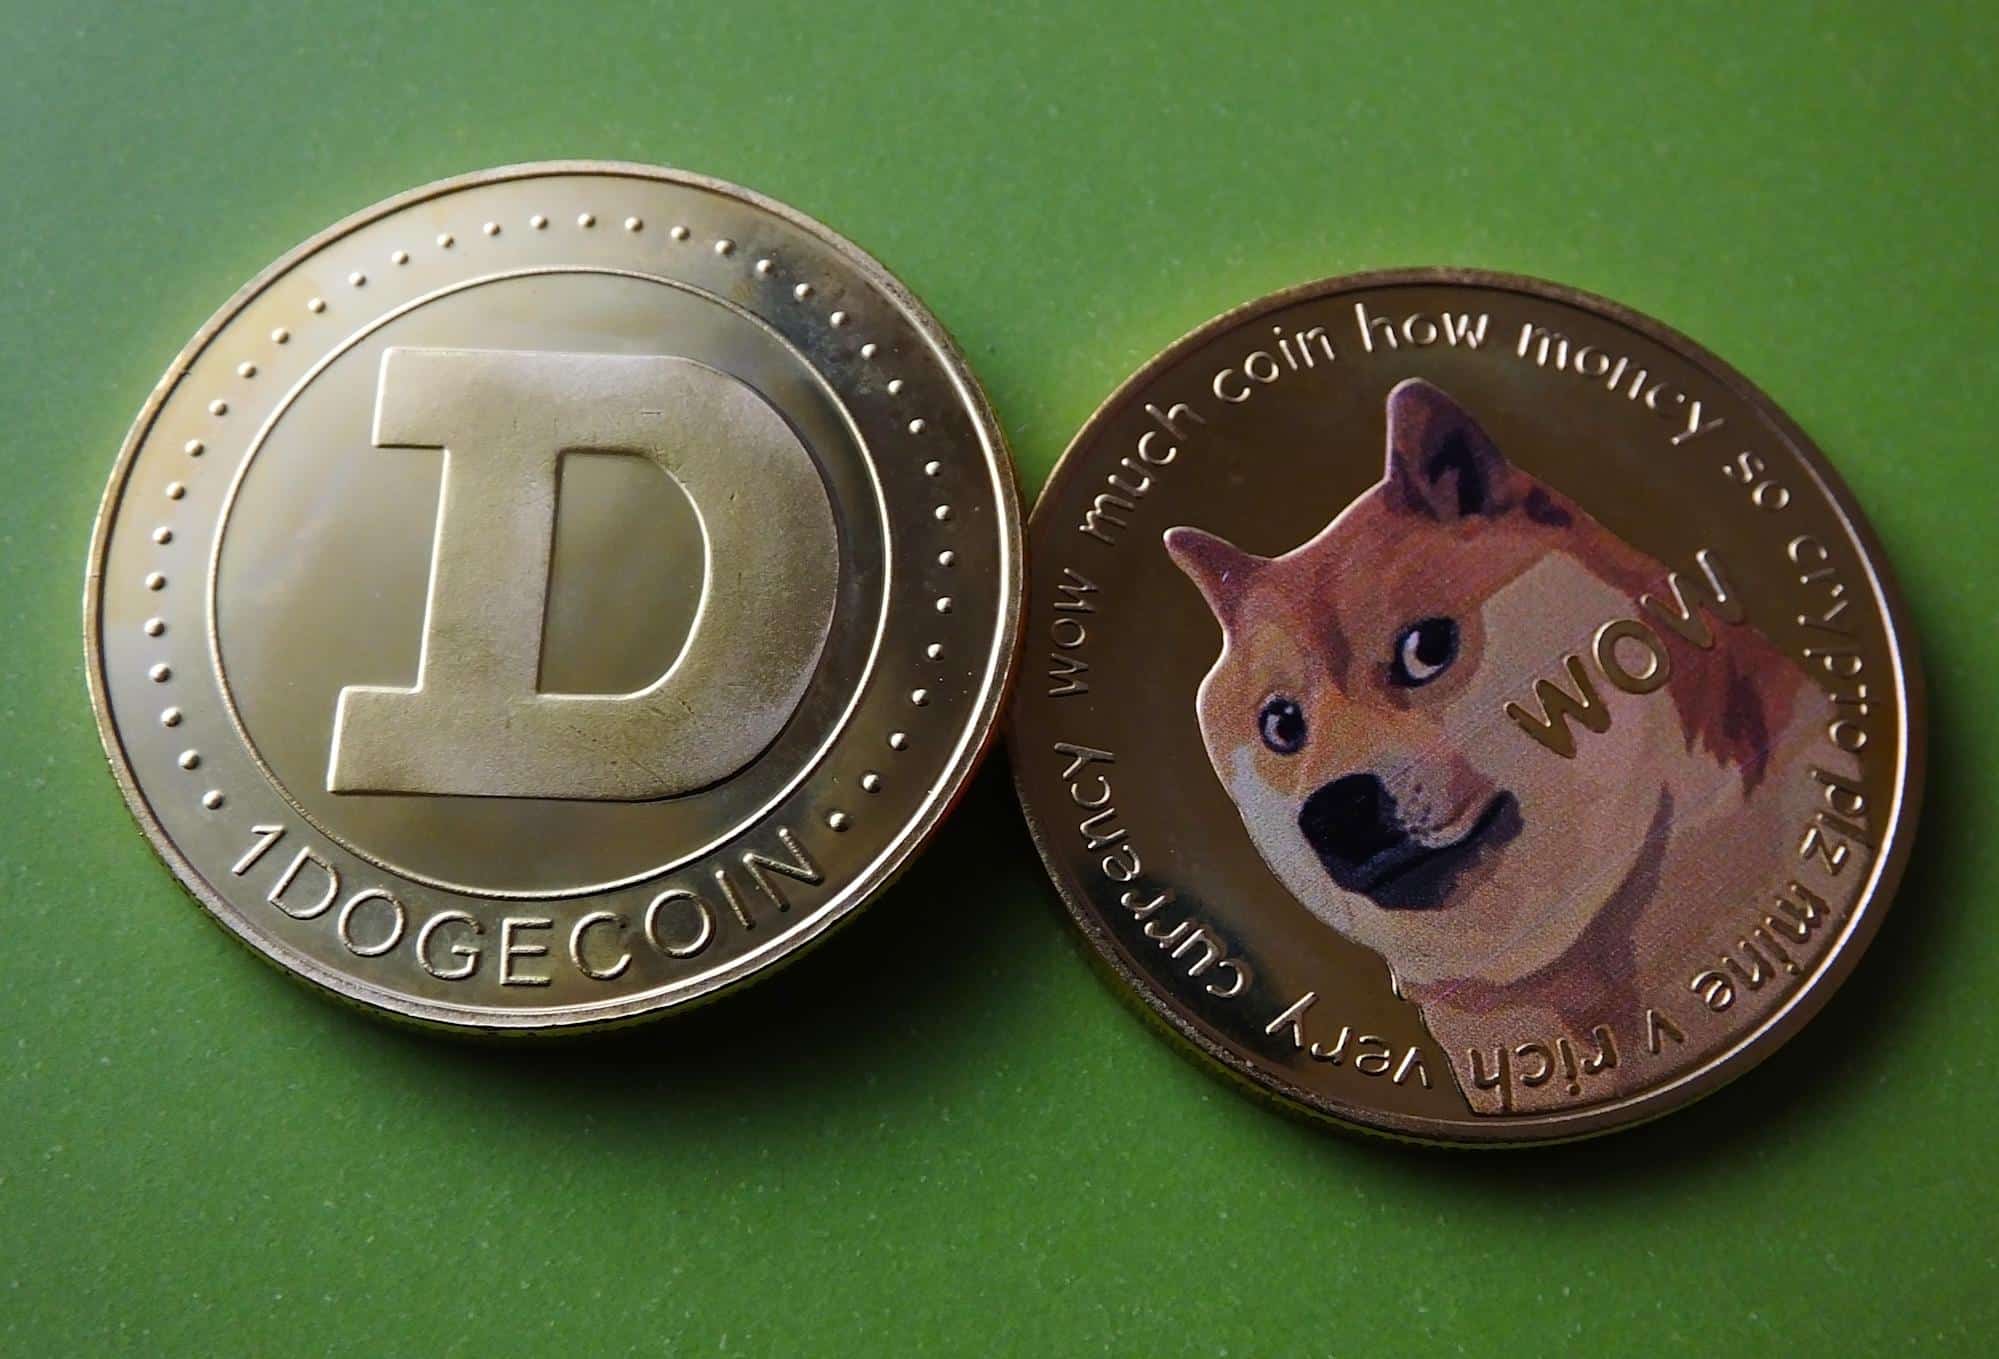 Joke is on Wall Street, Dogecoin surges over 26,000% in last 6 months